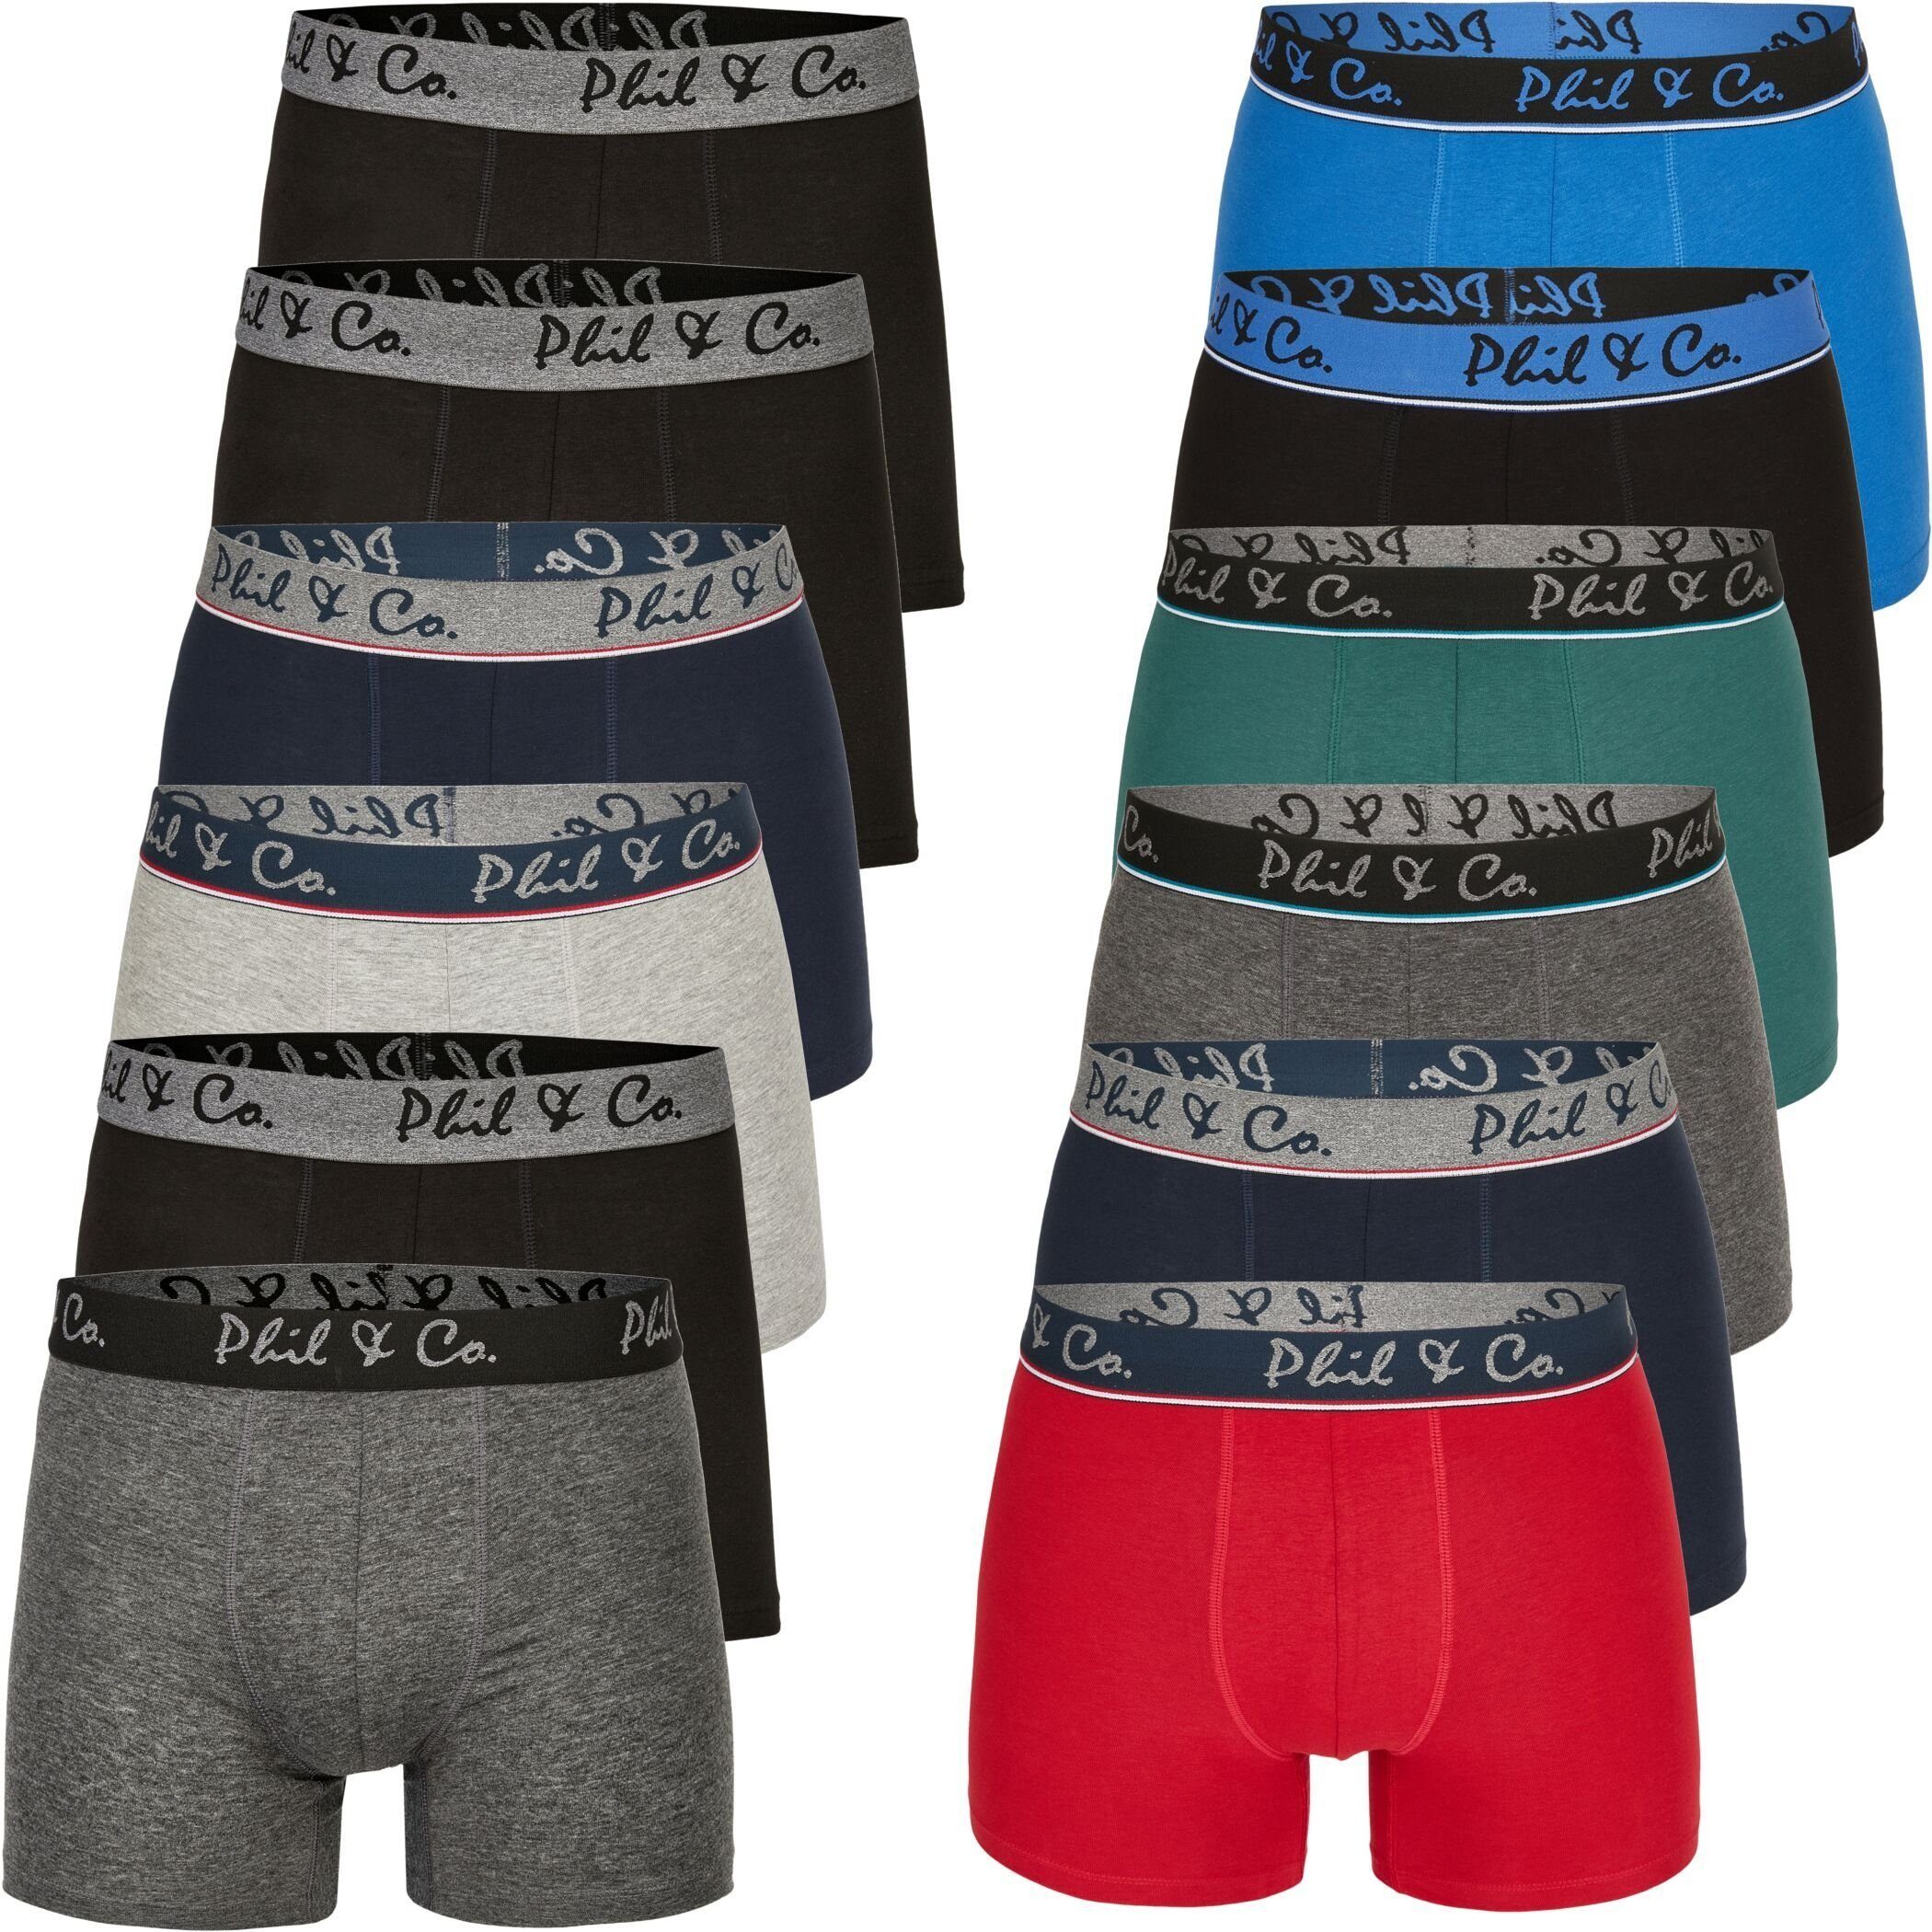 Phil & Co. Boxershorts 12 Pack Phil & Co Berlin Jersey Boxershorts Trunk Short Pant FARBWAHL (1-St) DESIGN 02